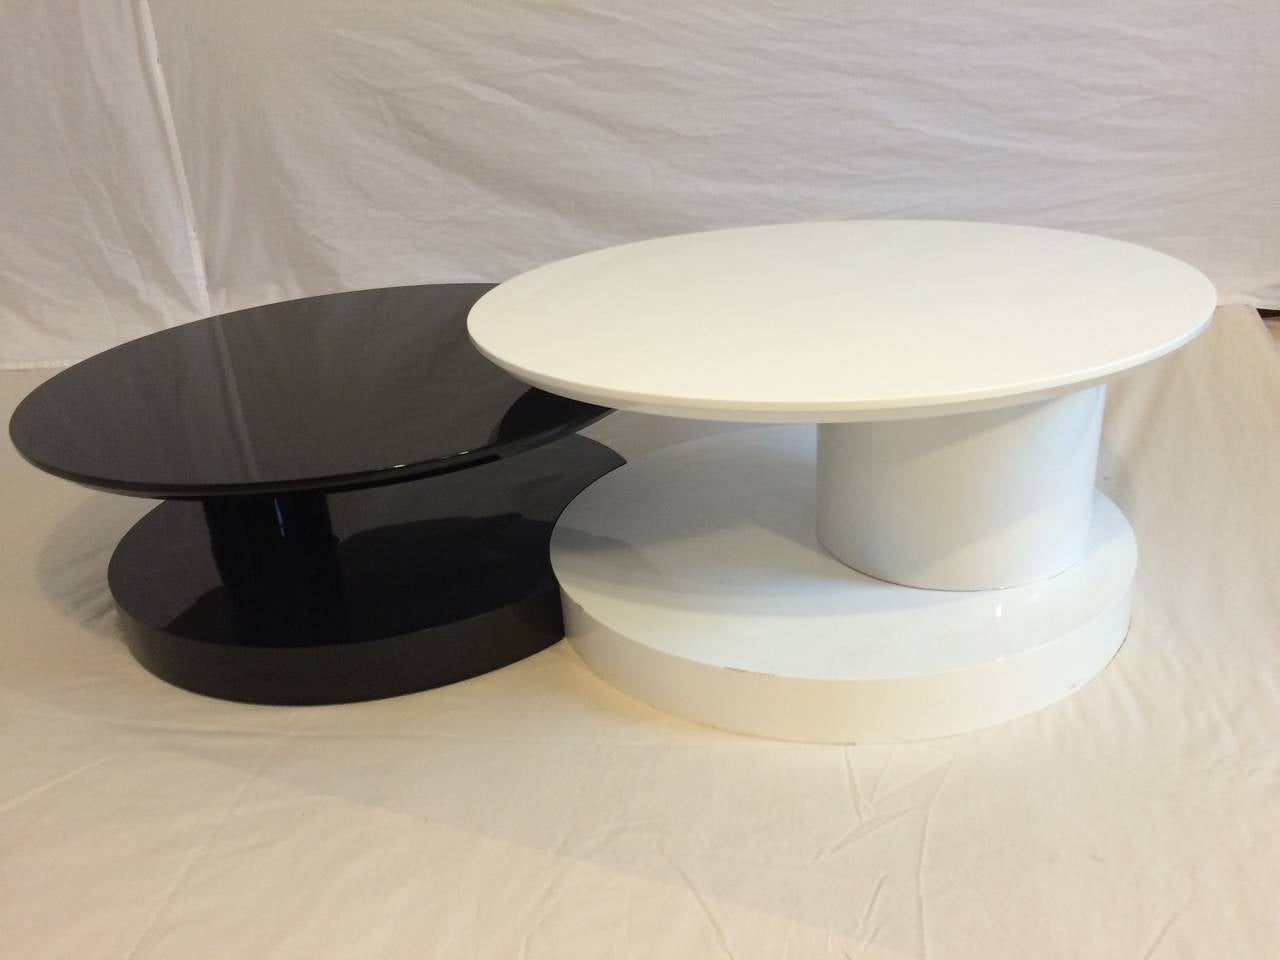 The table is in two parts. The white one is higher and swivels.